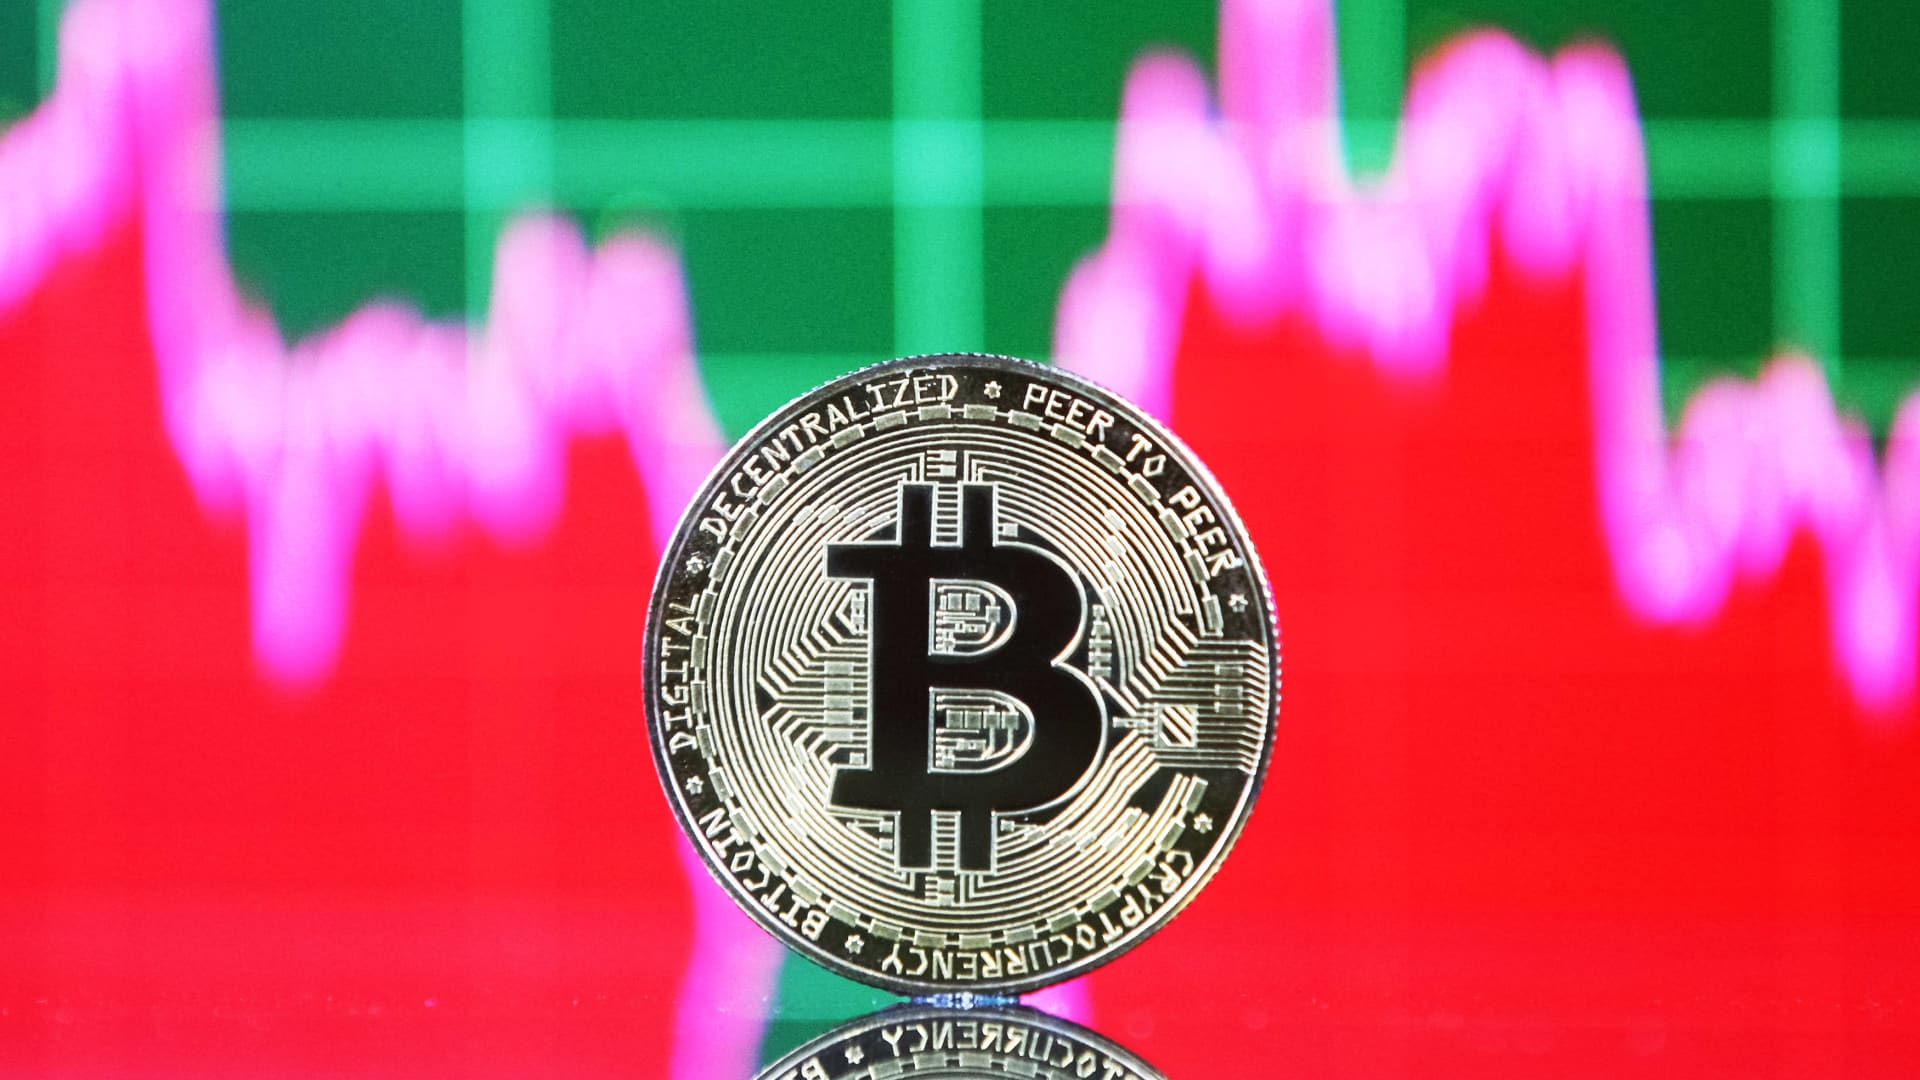 Bitcoin (BTC) is headed for its worst week since November with liquidity issues